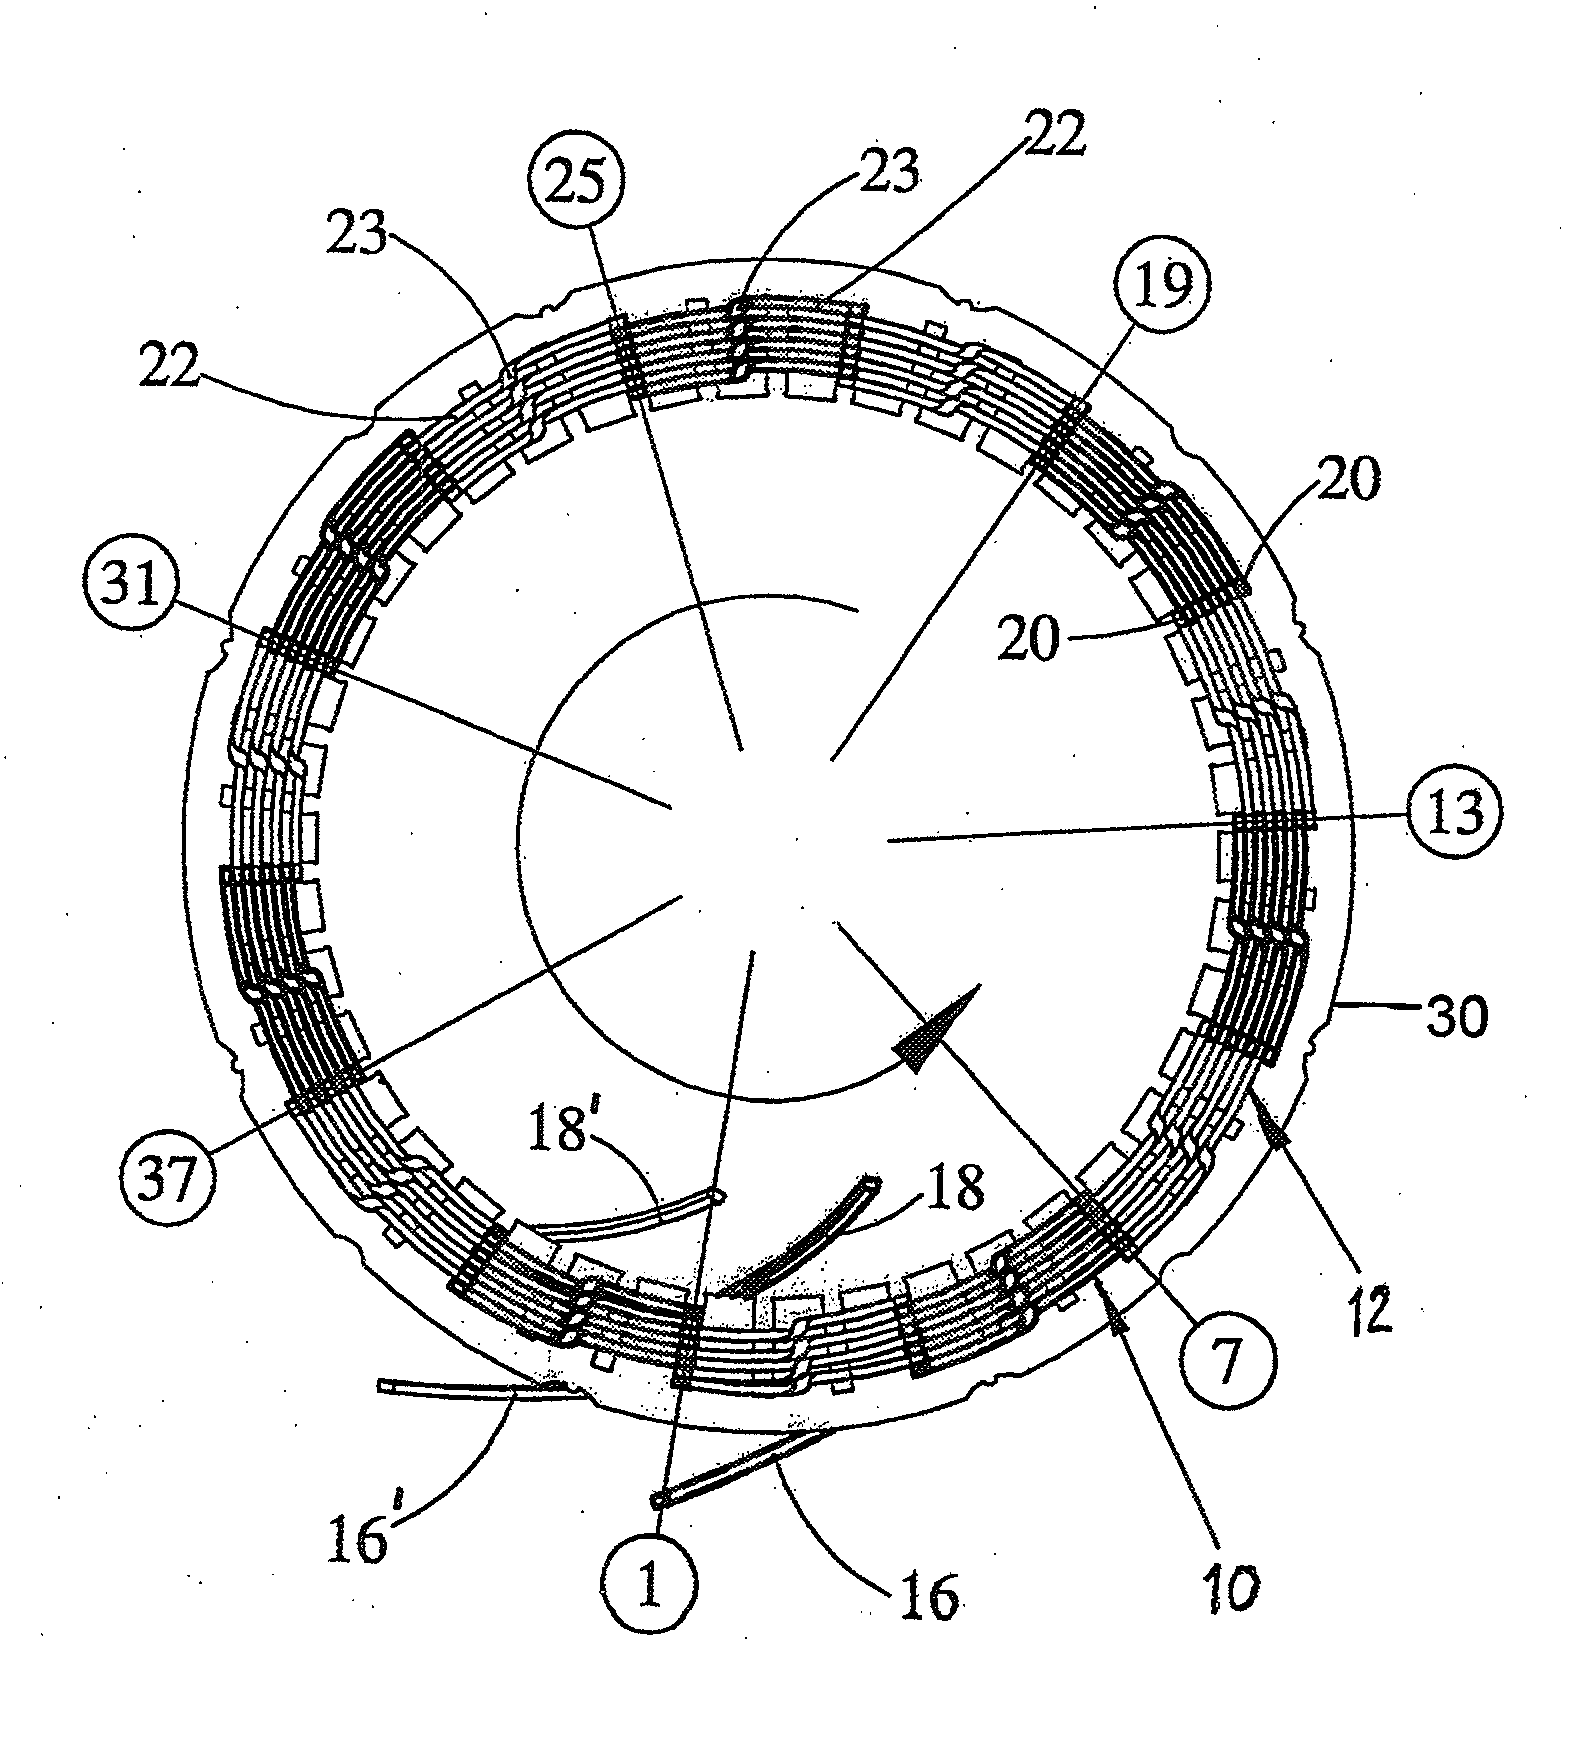 Stator or rotor with interlaced wire groups forming an intertwined wave winding